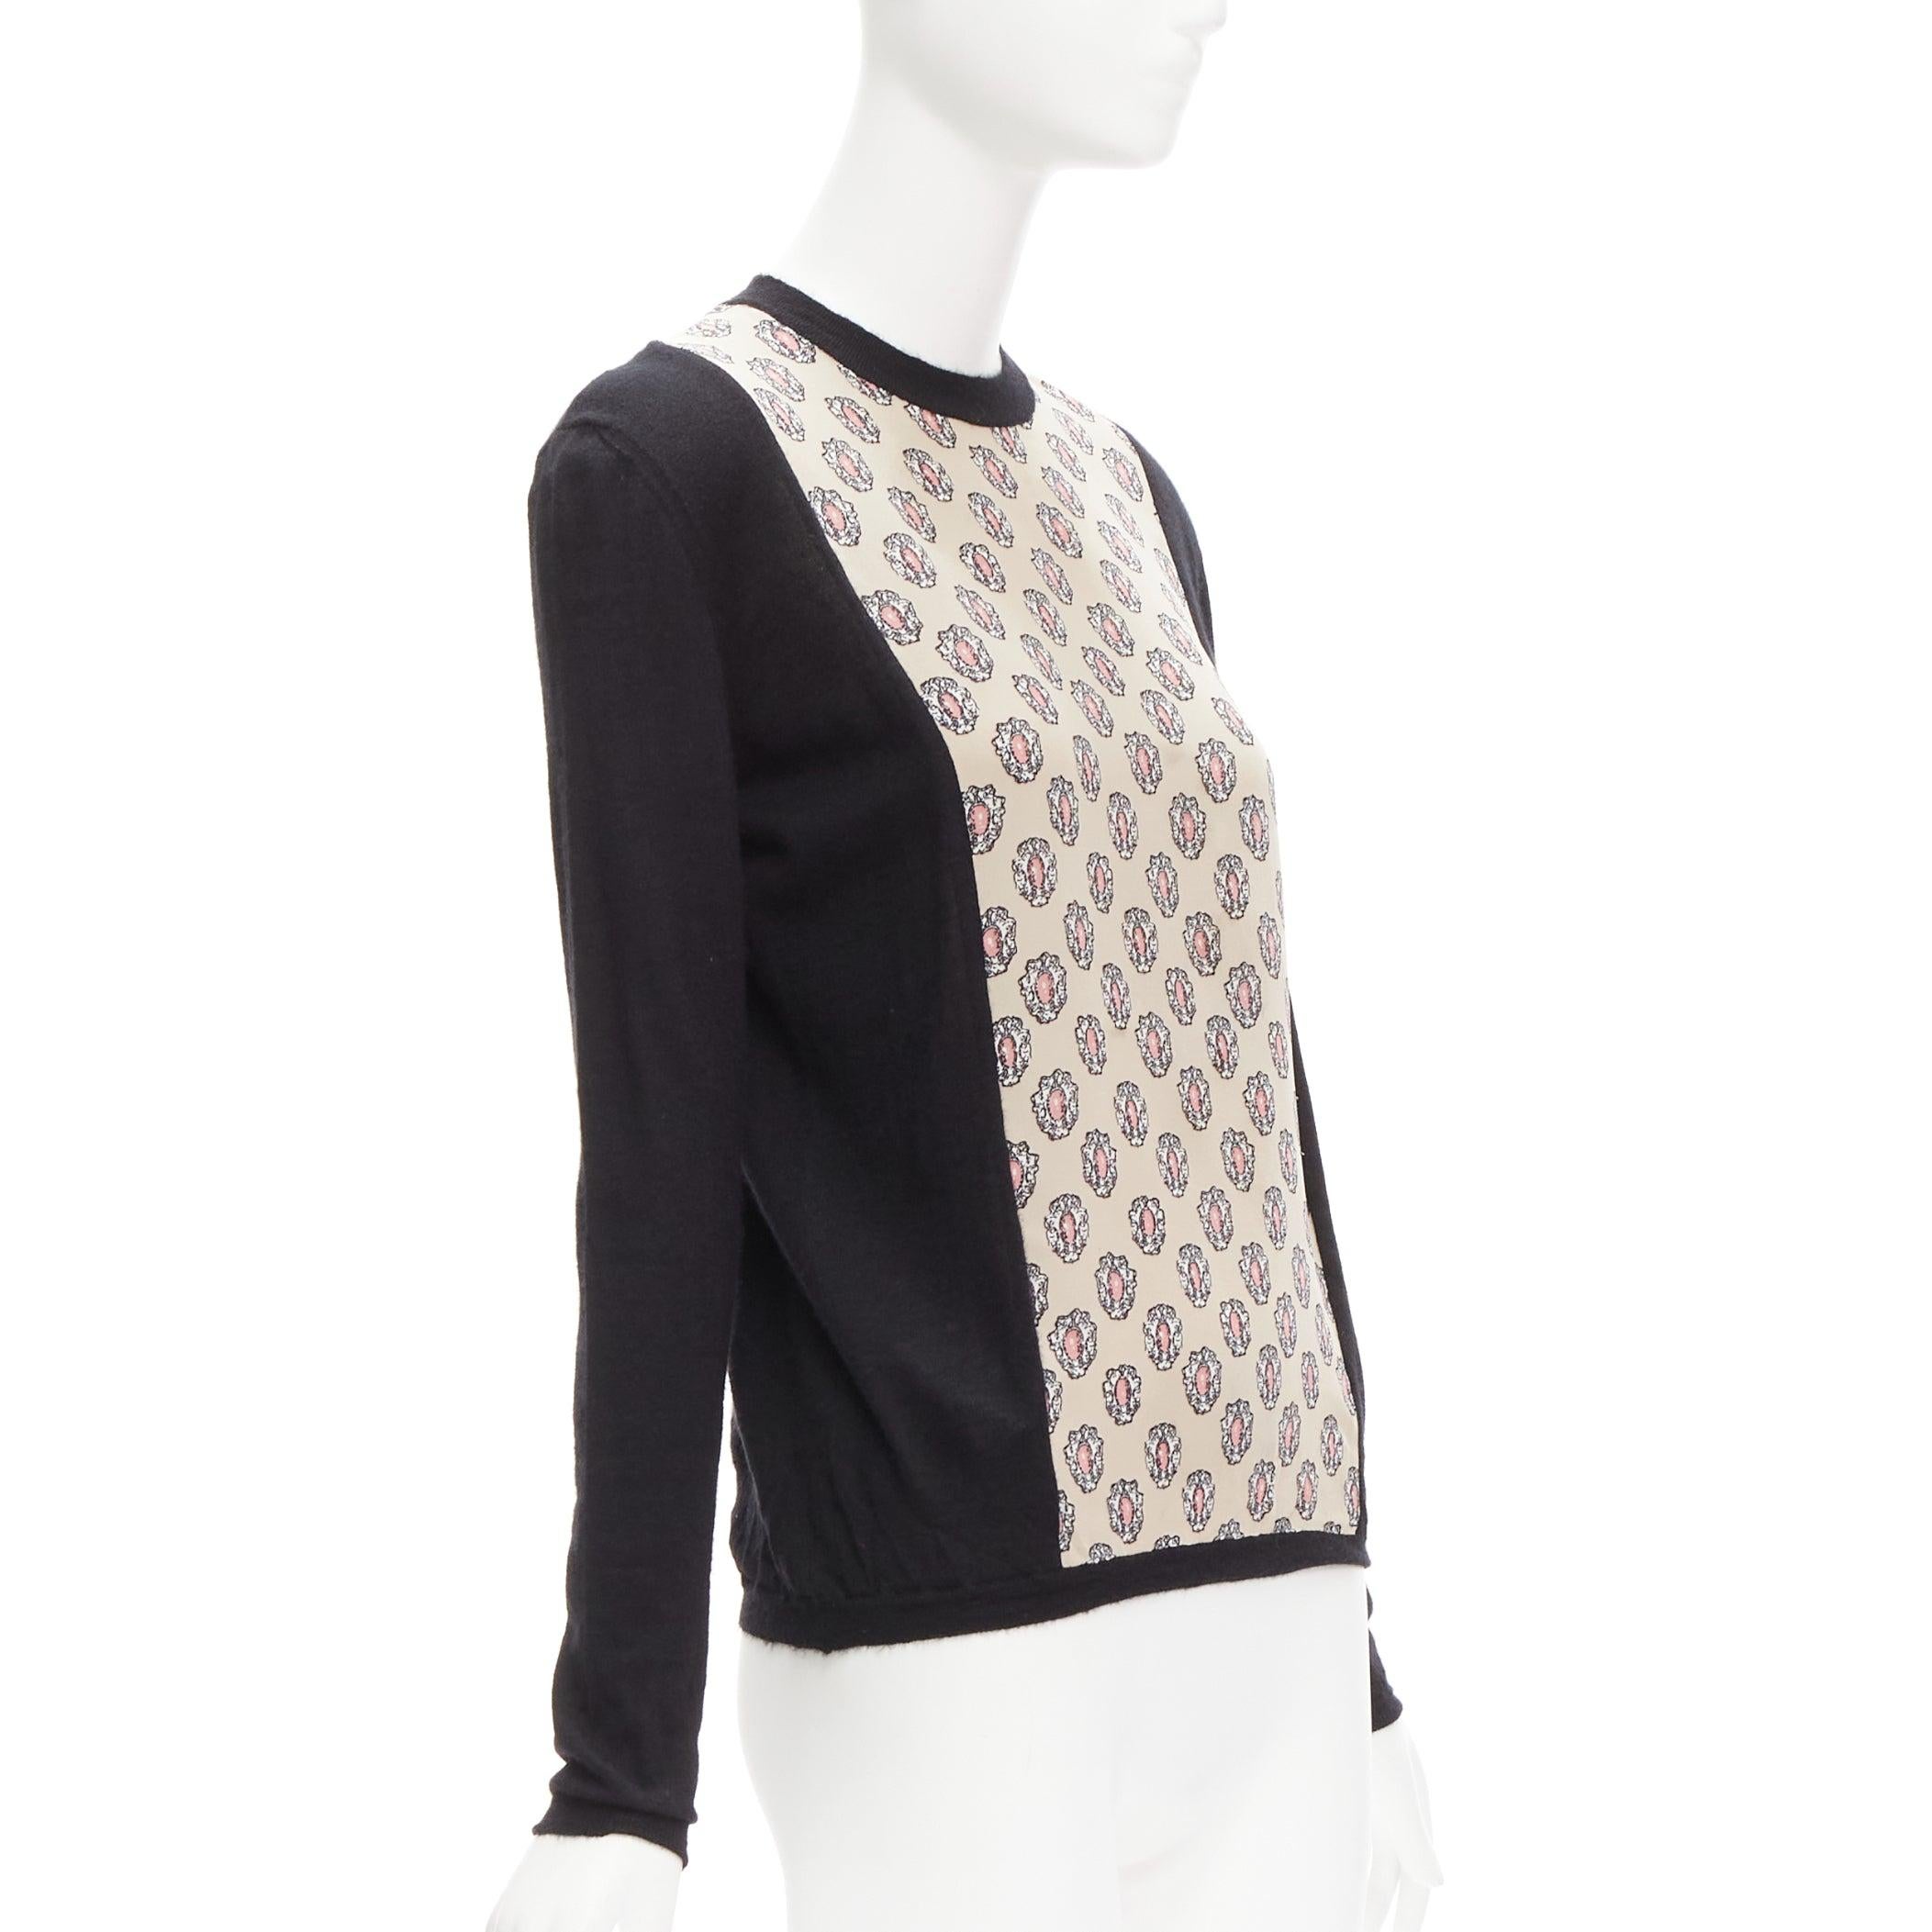 MARNI cashmere silk beige pink jewel print panel black sweater IT40 S
Reference: CELG/A00344
Brand: Marni
Material: Cashmere, Silk
Color: Black, Beige
Pattern: Abstract
Closure: Slip On
Made in: Italy

CONDITION:
Condition: Good, this item was